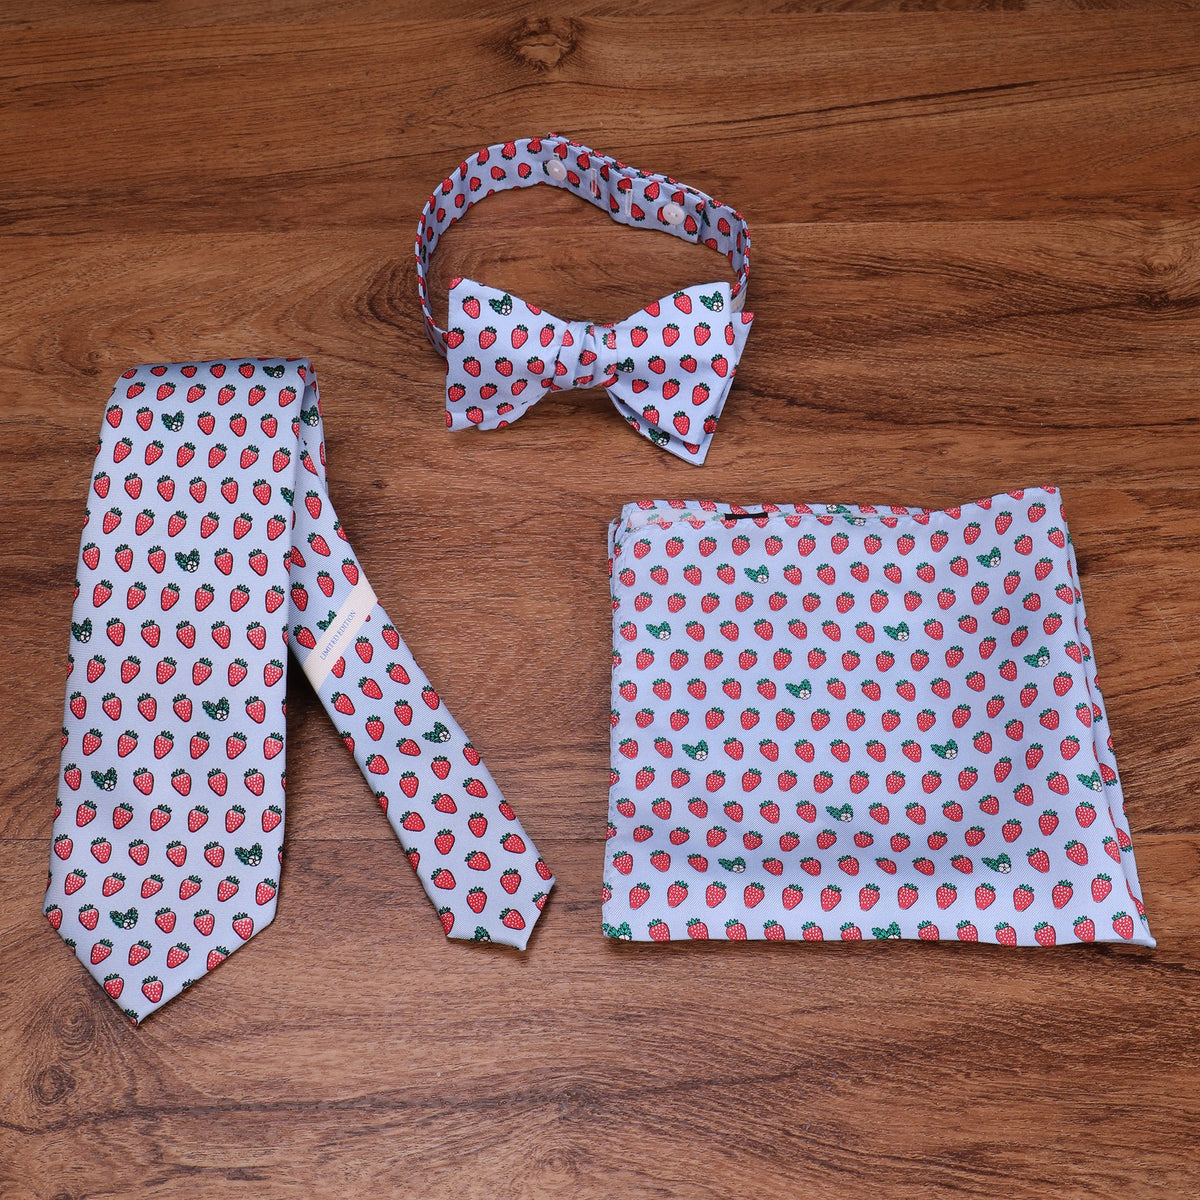 Limited Edition NOLA Couture X Haspel Lt. Blue Strawberry Print Bow Tie - O/S